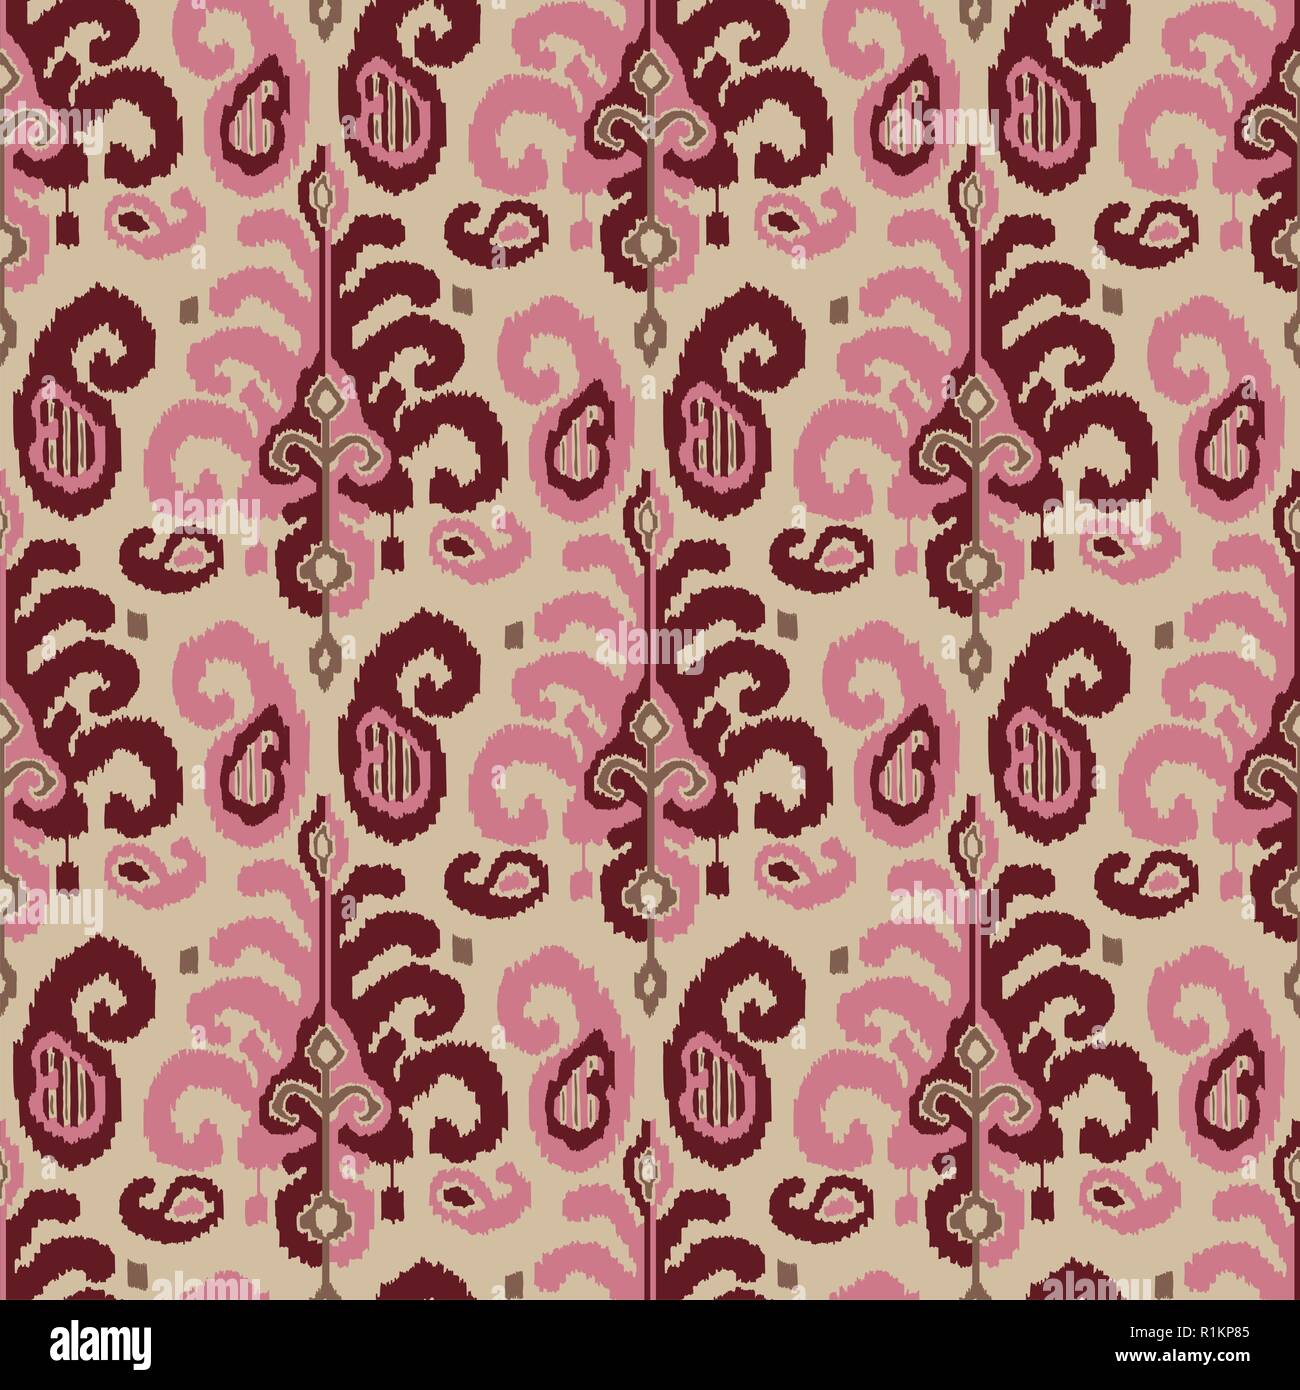 Seamless ikat paisley pattern. Traditional oriental ethnic ornament. Burgundy red, pink and taupe on beige background. Textile design. Stock Vector